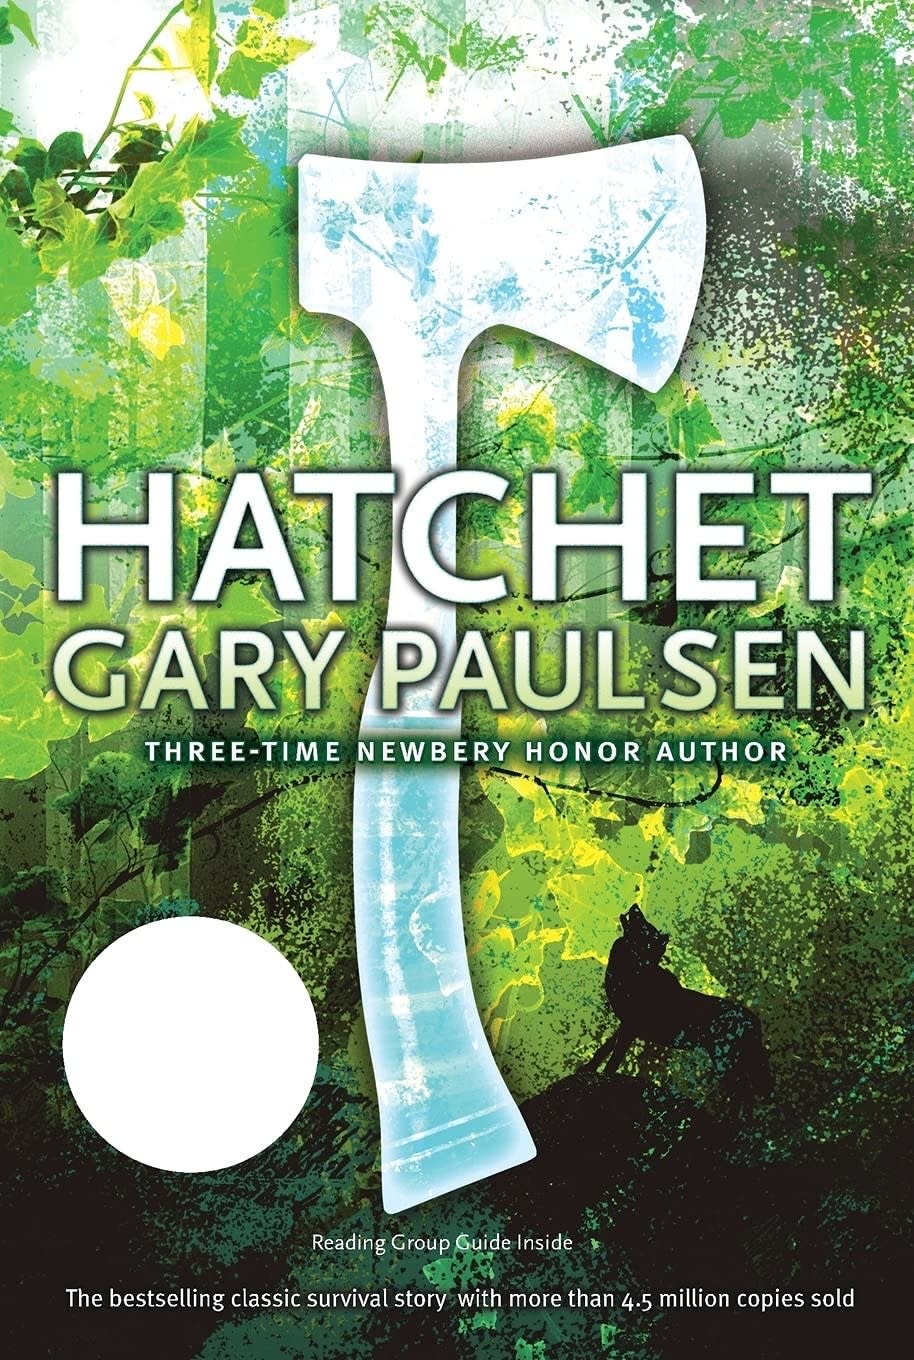 The cover of "Hatchet" by Gary Paulson